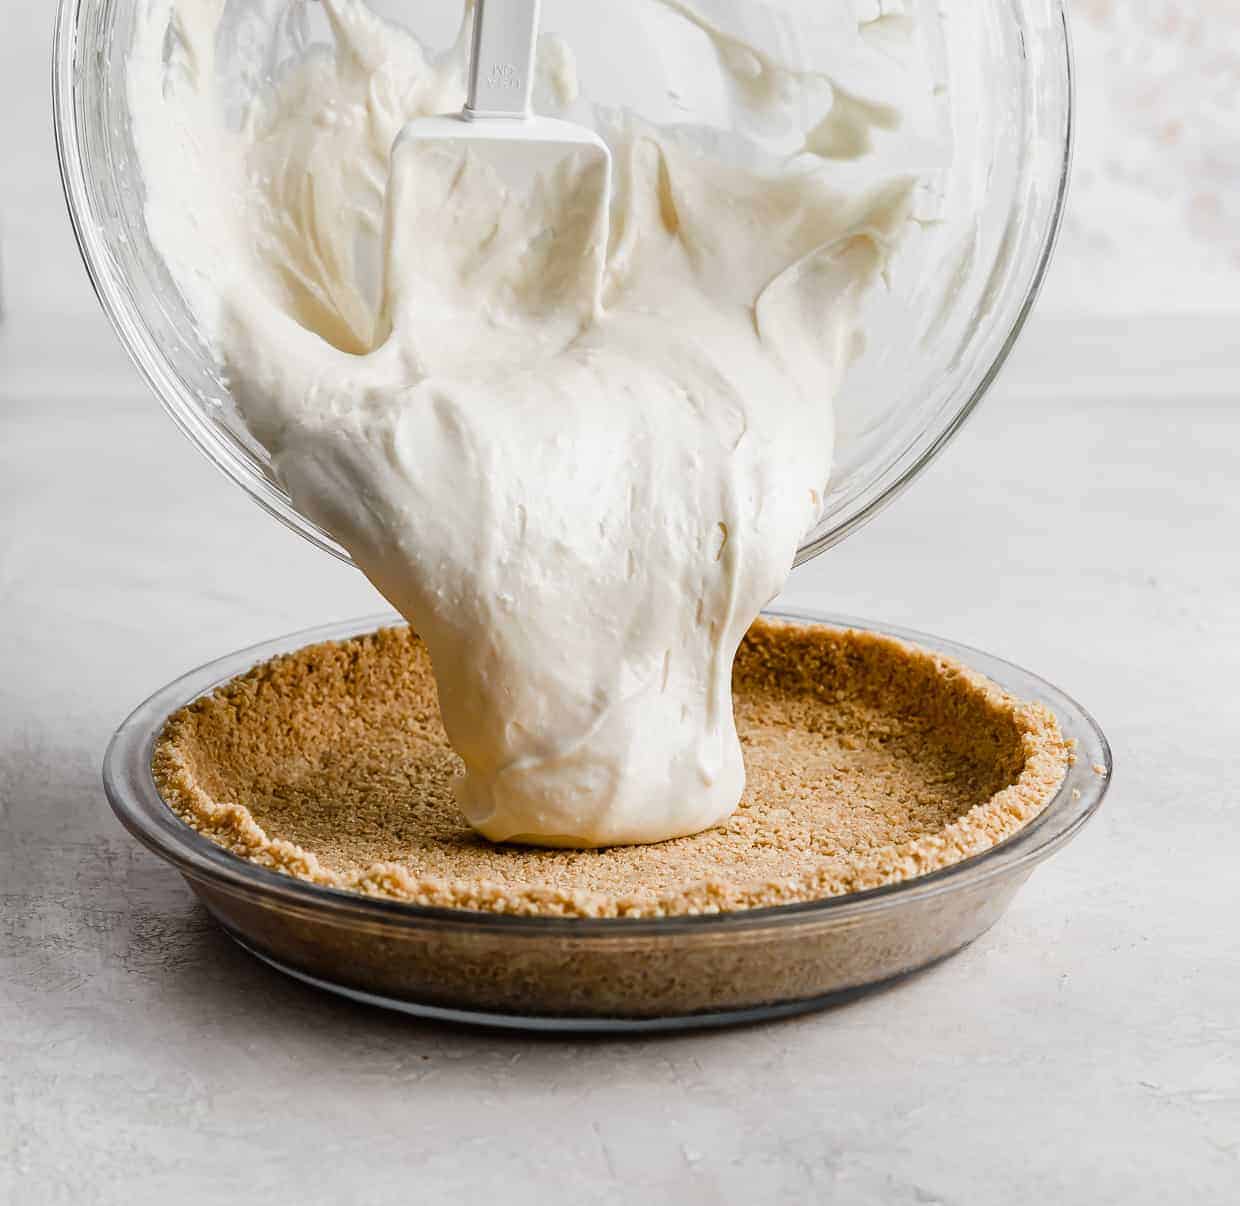 No-Bake Cheesecake filling being poured into a graham cracker crust.